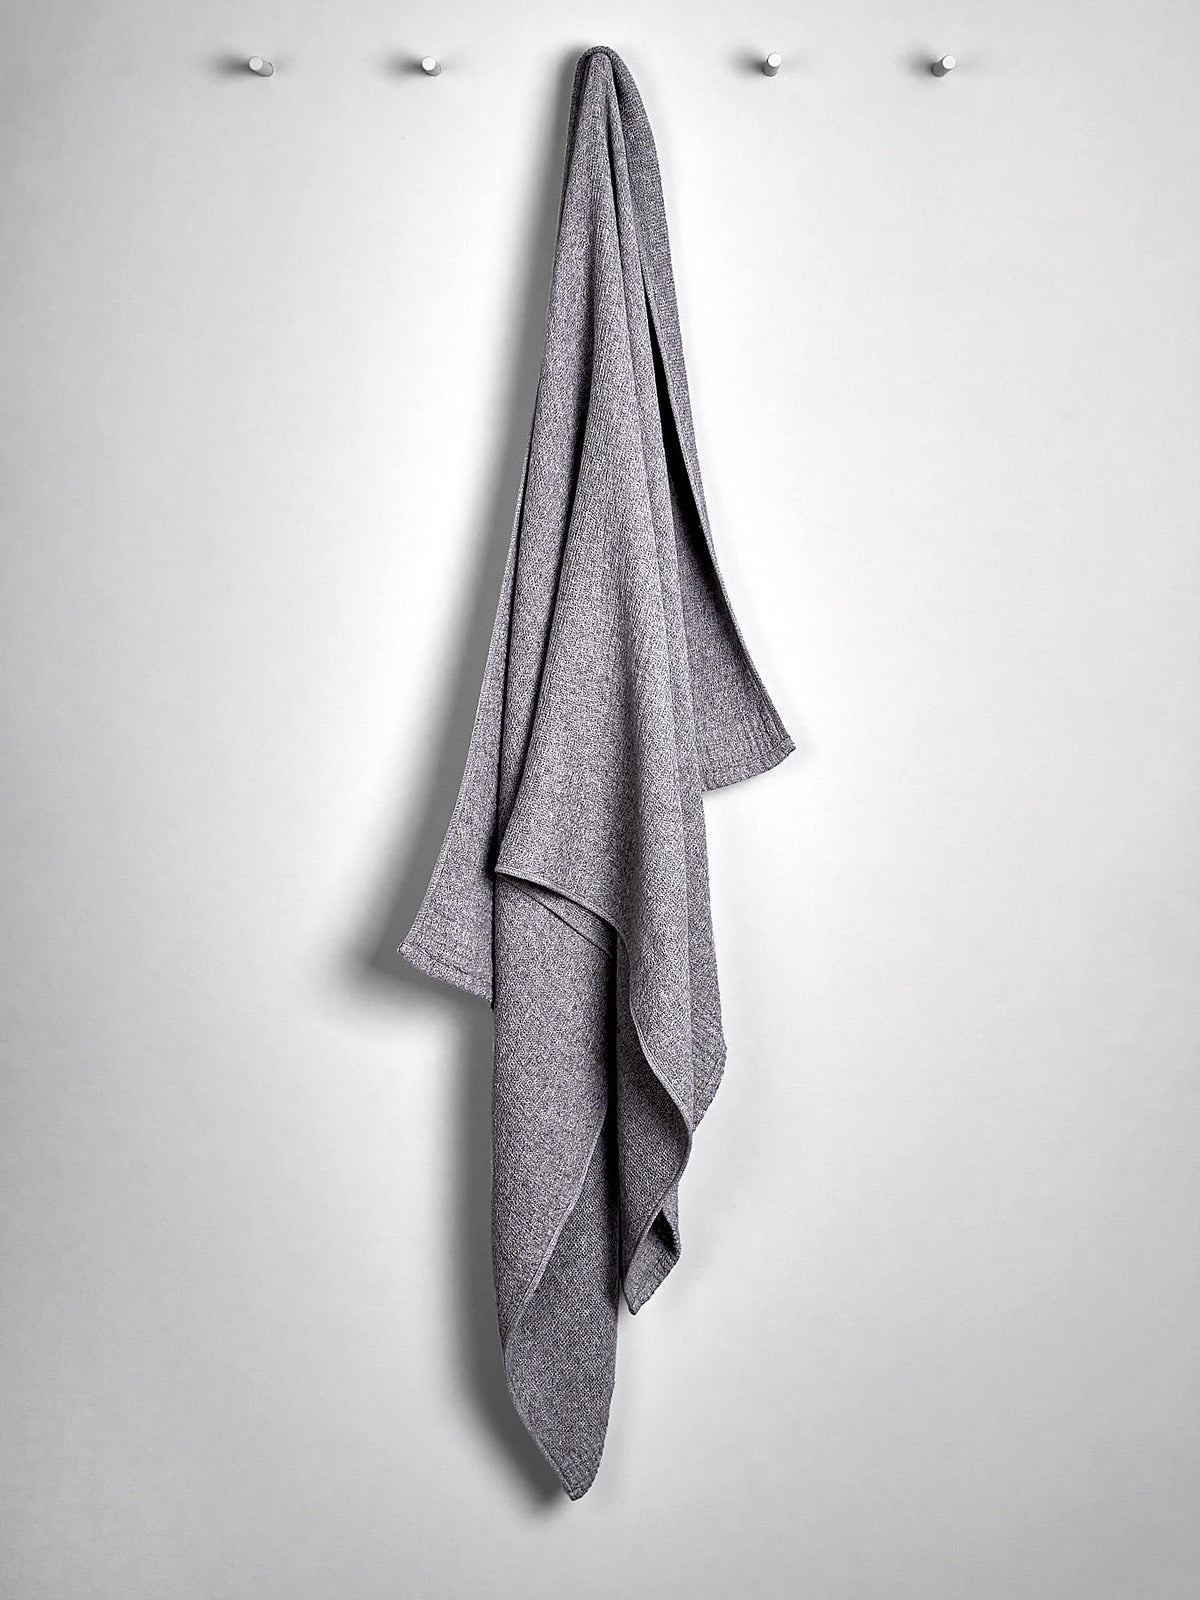 A gray Lana hand towel hanging on a hook against a light-colored wall. (Brand name: Kontex)